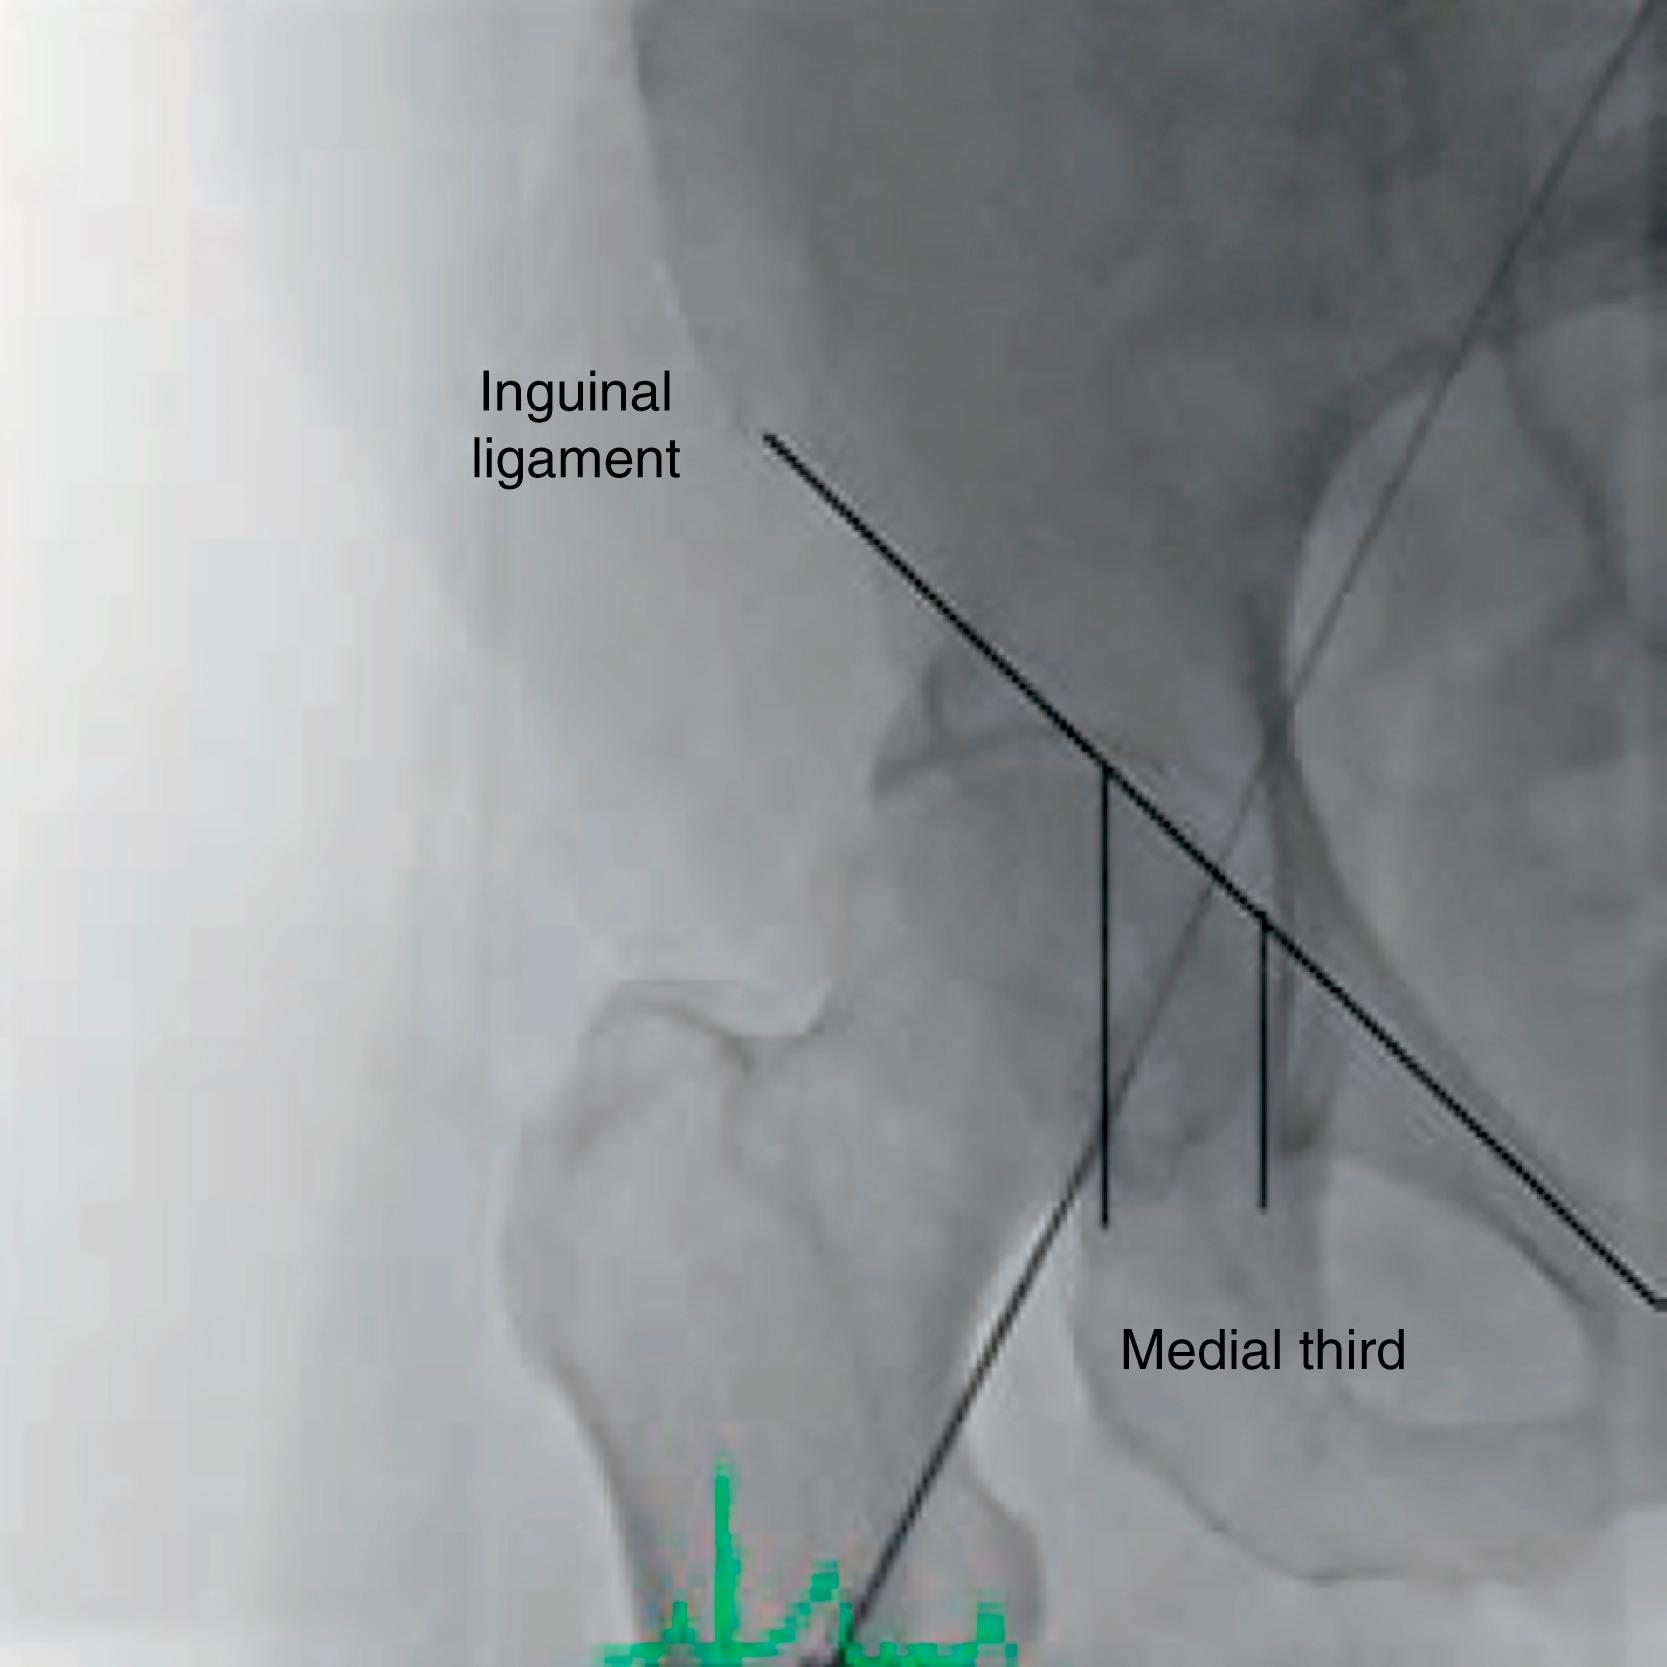 Figure 62.1, Anatomy of the femoral artery with the inguinal ligament and femoral head delineated. The common femoral artery lies over the medial one-third of the femoral head. A wire is located within the femoral artery in this X-ray image.